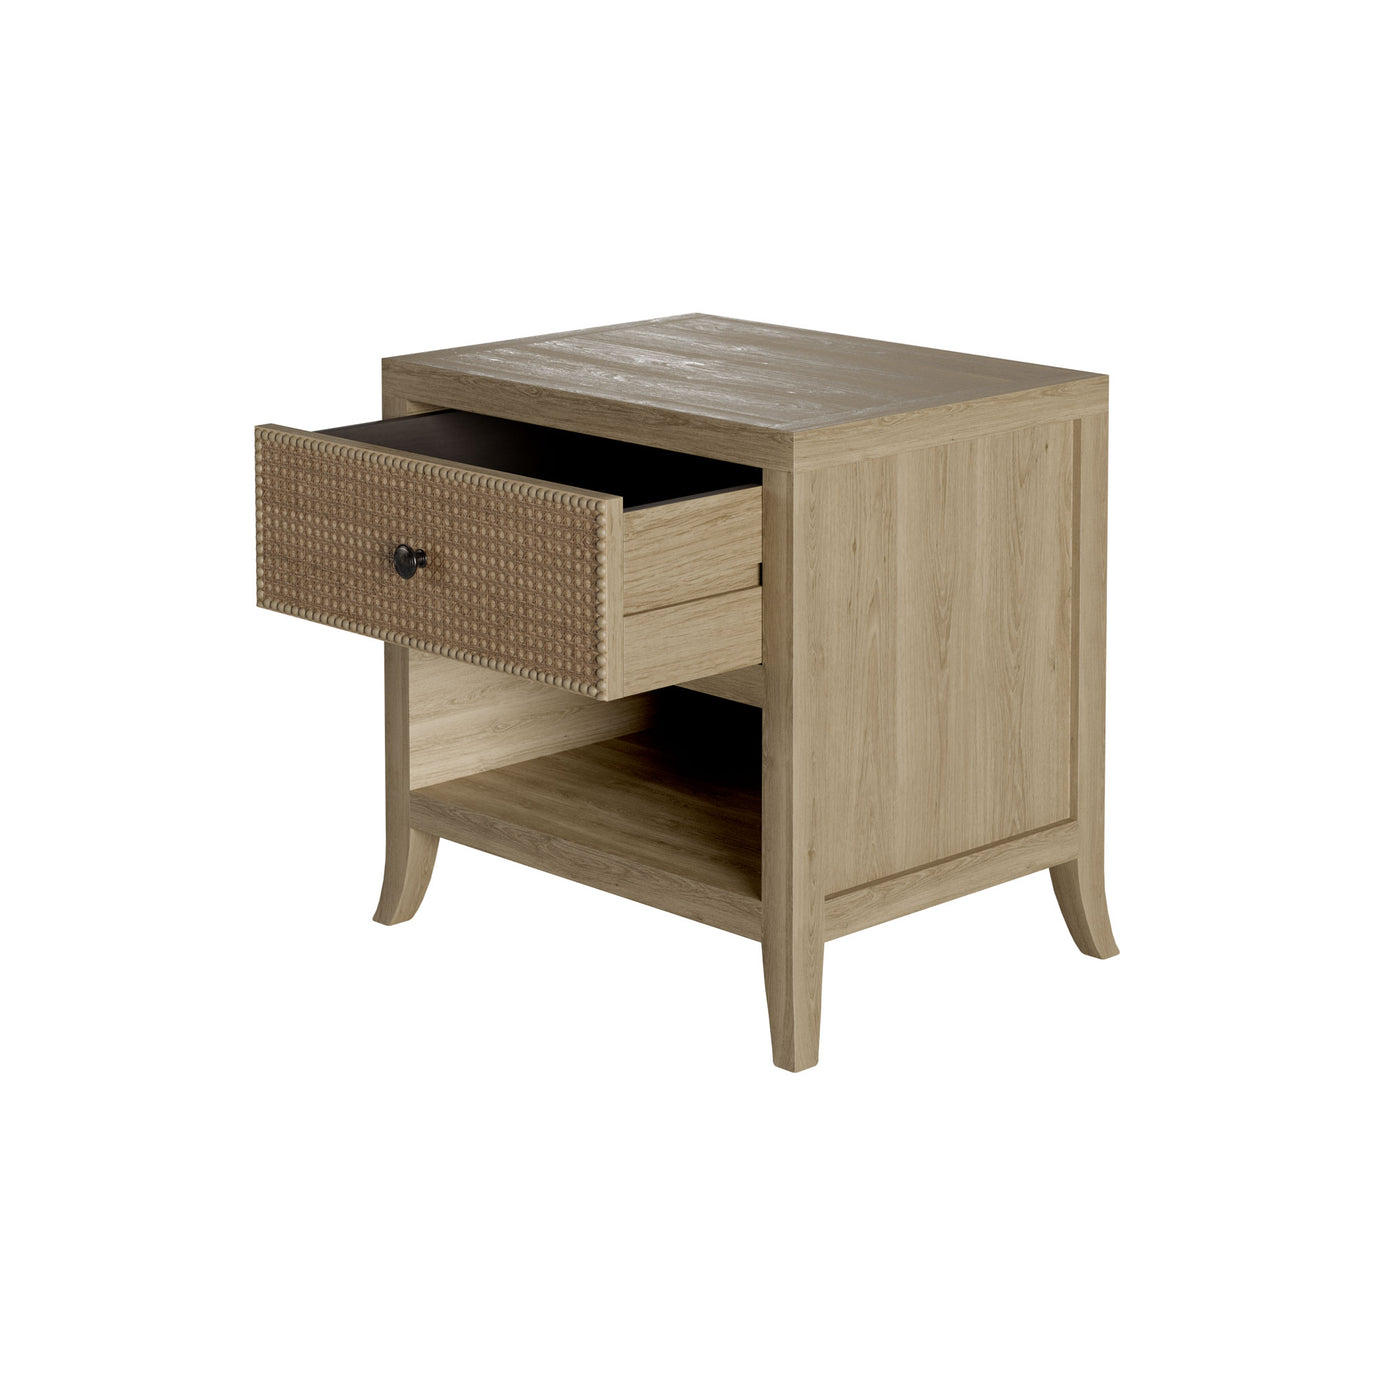 DI Designs Witley 1 Drawer Bedside